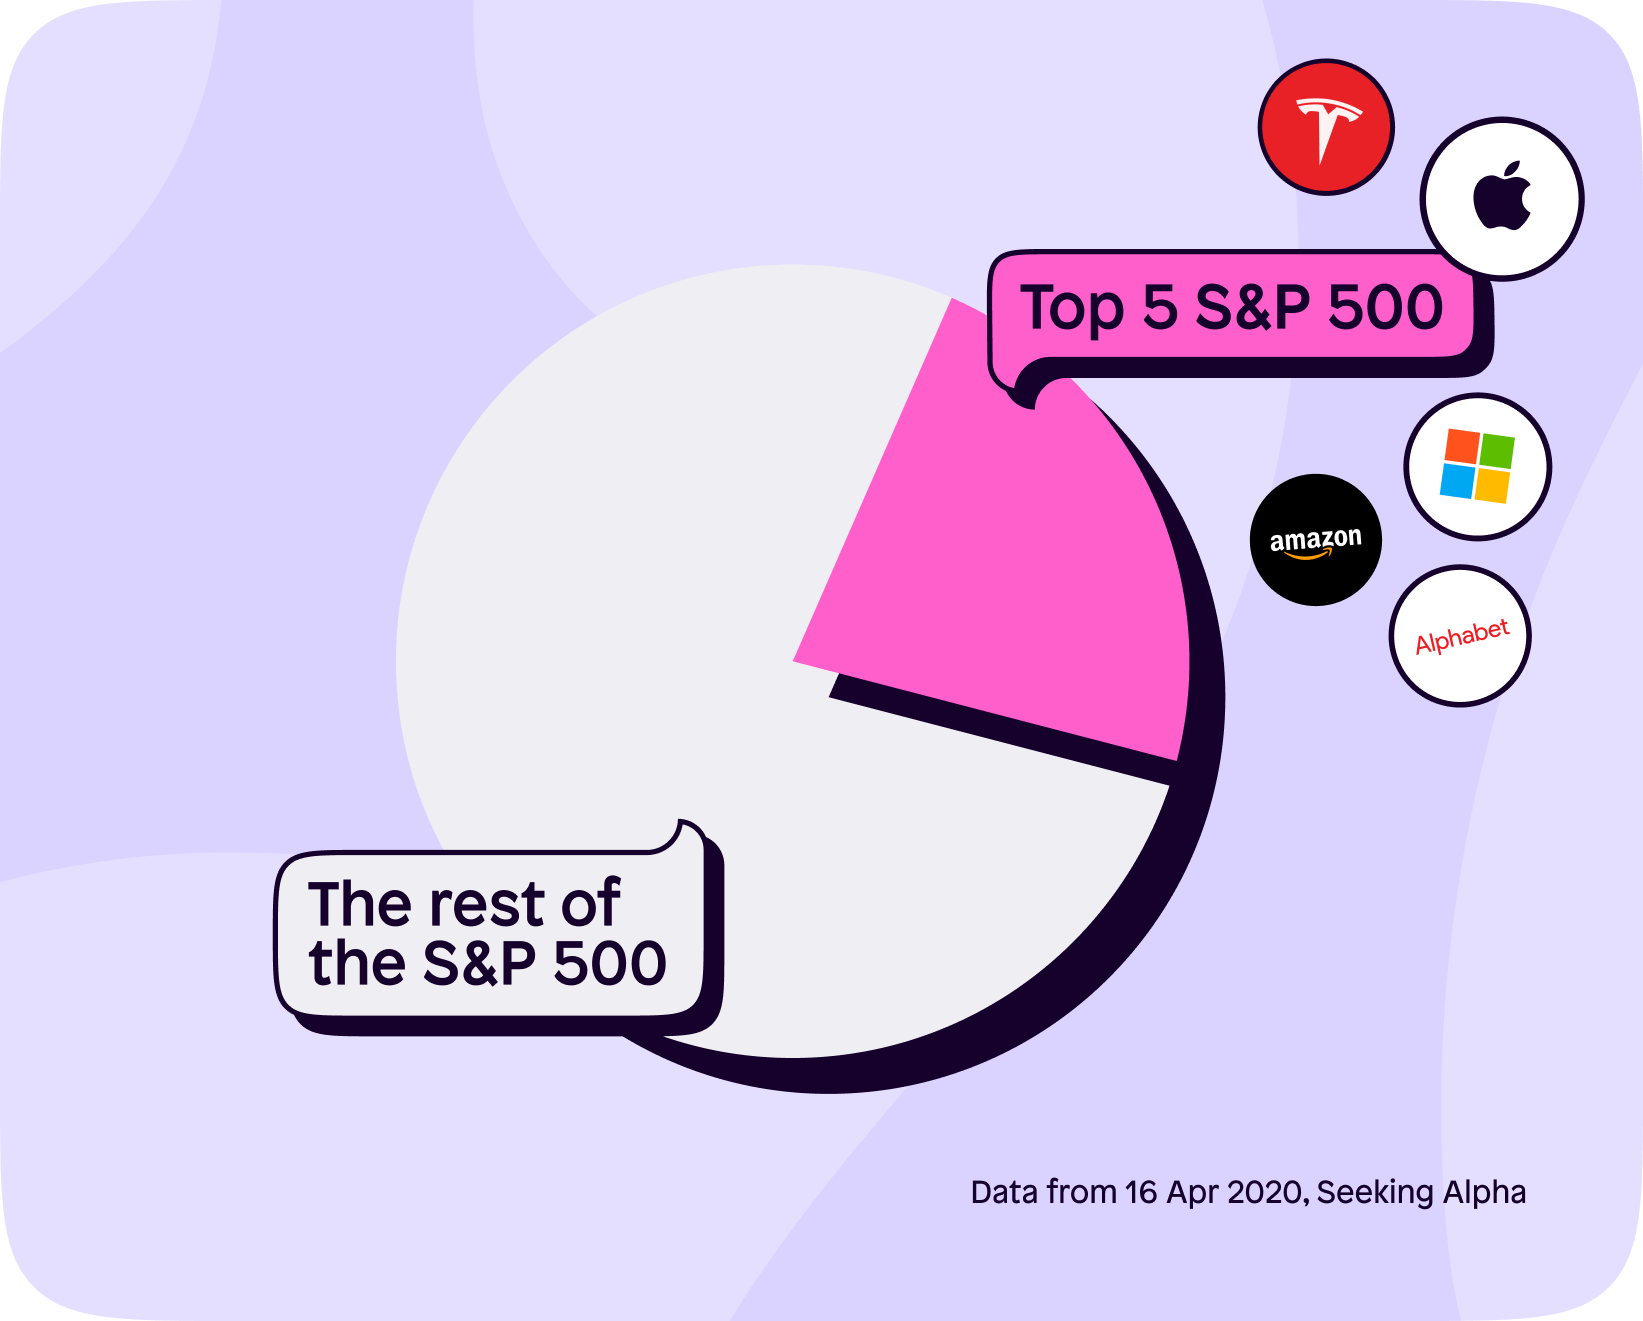 S&P 500 visual representation with Tesla, Apple, Amazon, Microsoft and Alphabet demonstrarting the % they make up